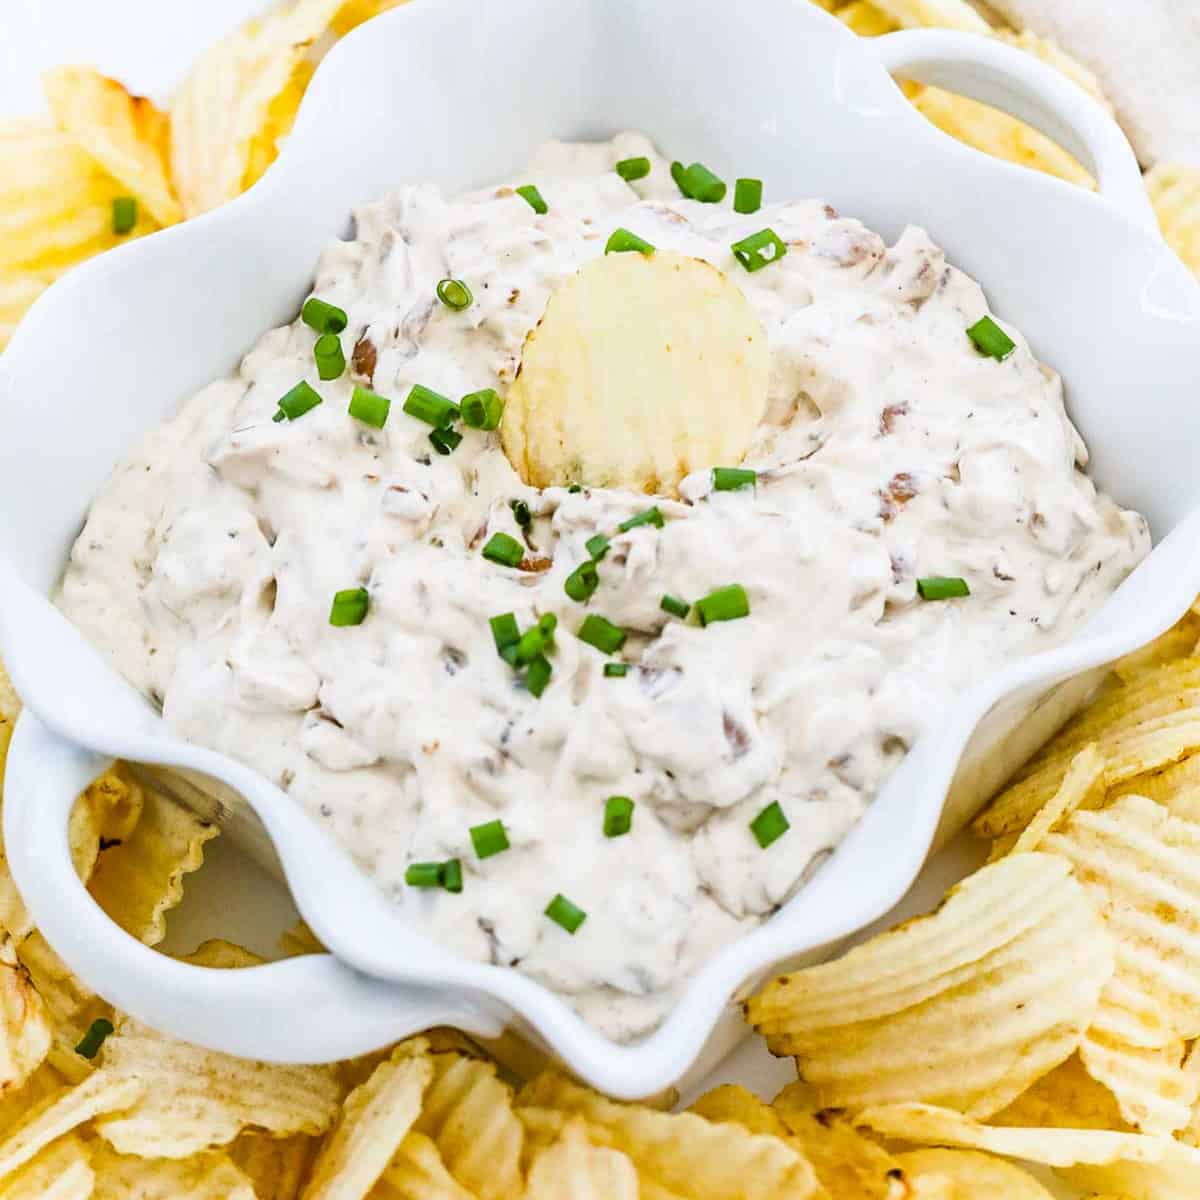 Ruffled potato chips on a plate with homemade French onion dip.